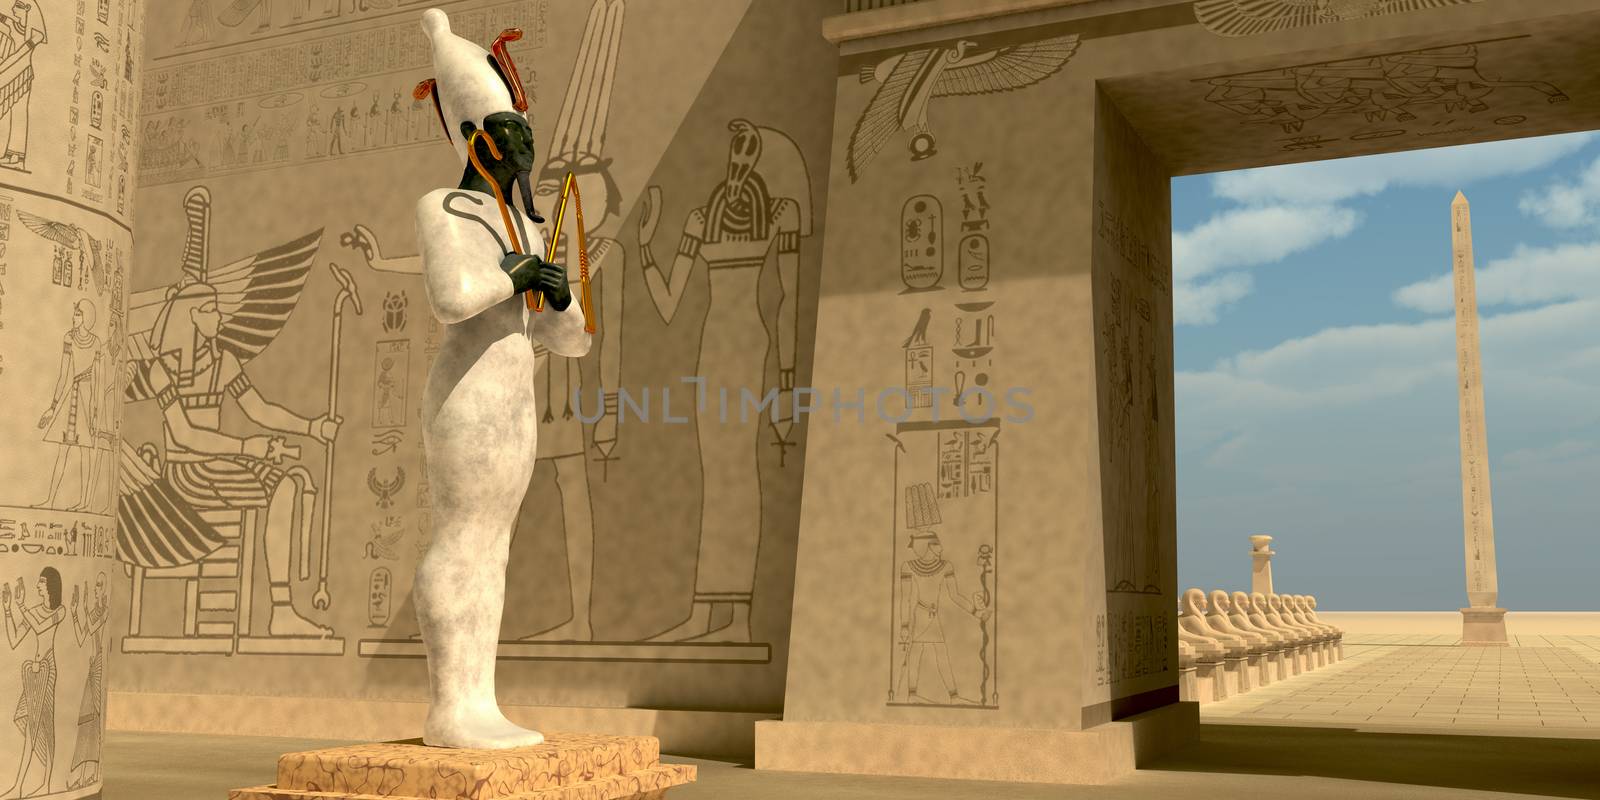 Osiris in Pharaoh's temple was known as an Egyptian god of the afterlife and resurrection.